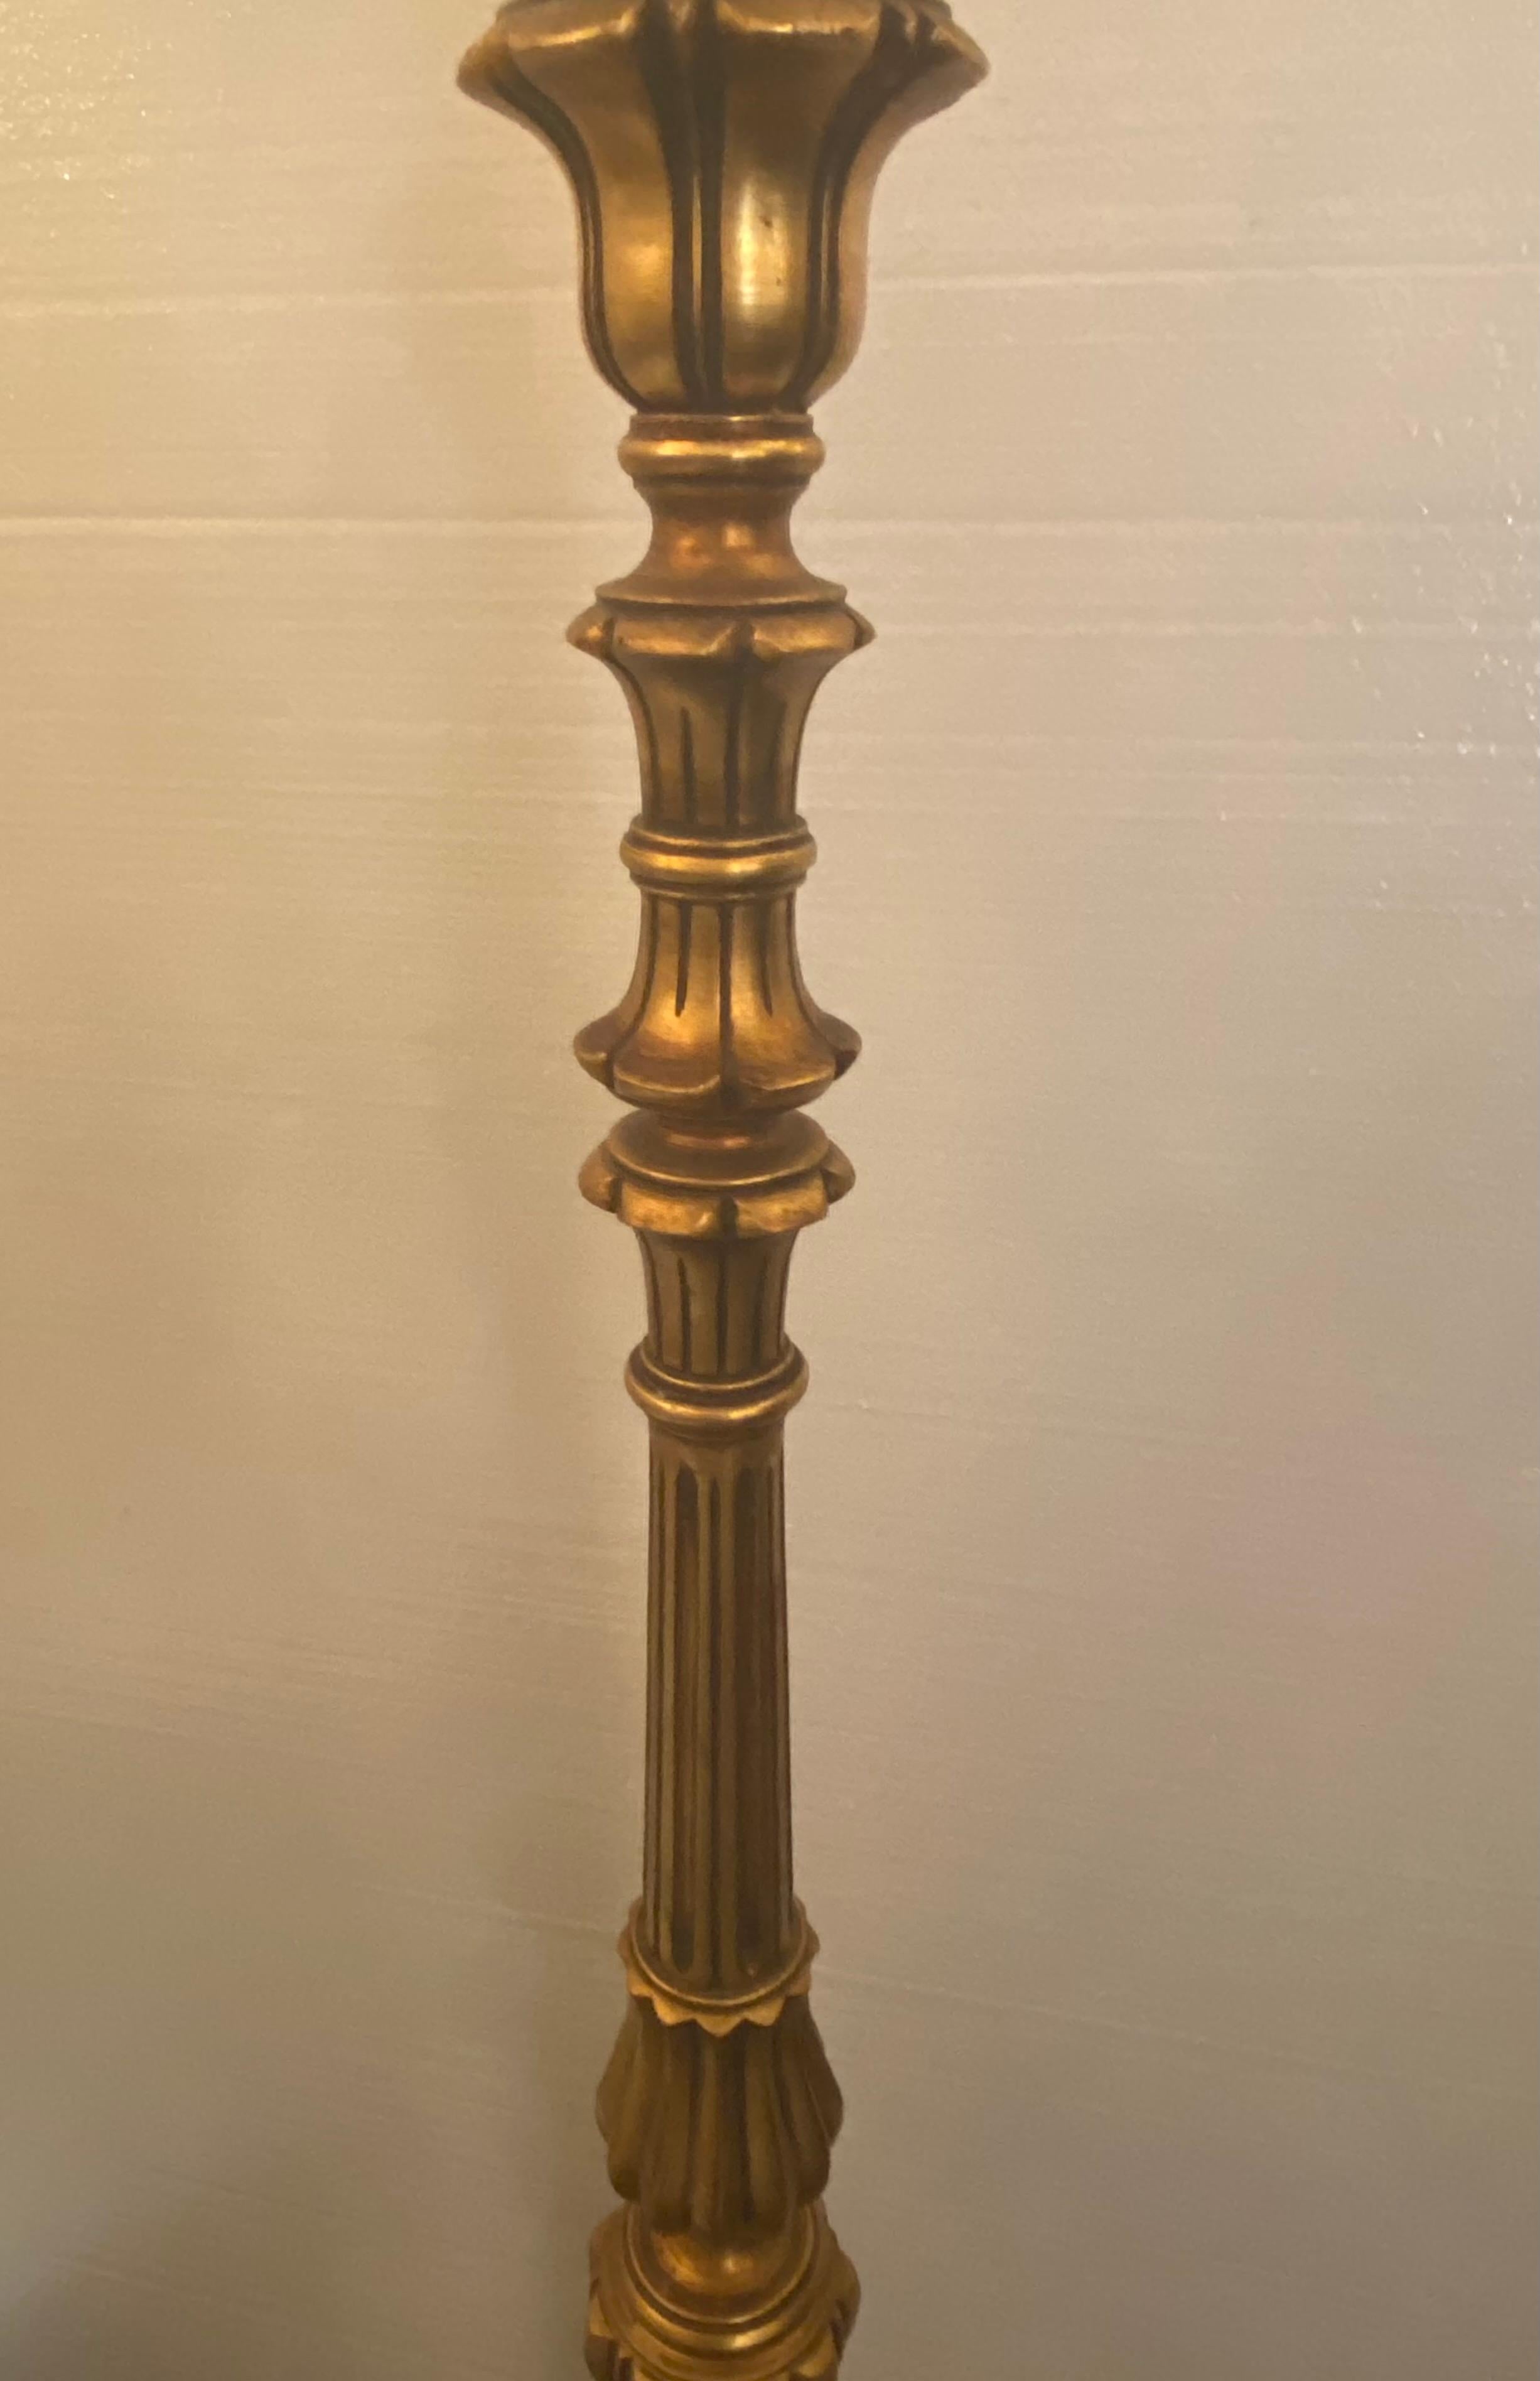 Italian Louis XVI style giltwood standing lamp, 20th c., fluted and turned standard ending in single large faux candle fitted with three light fixtures, rising on round gadrooned base.